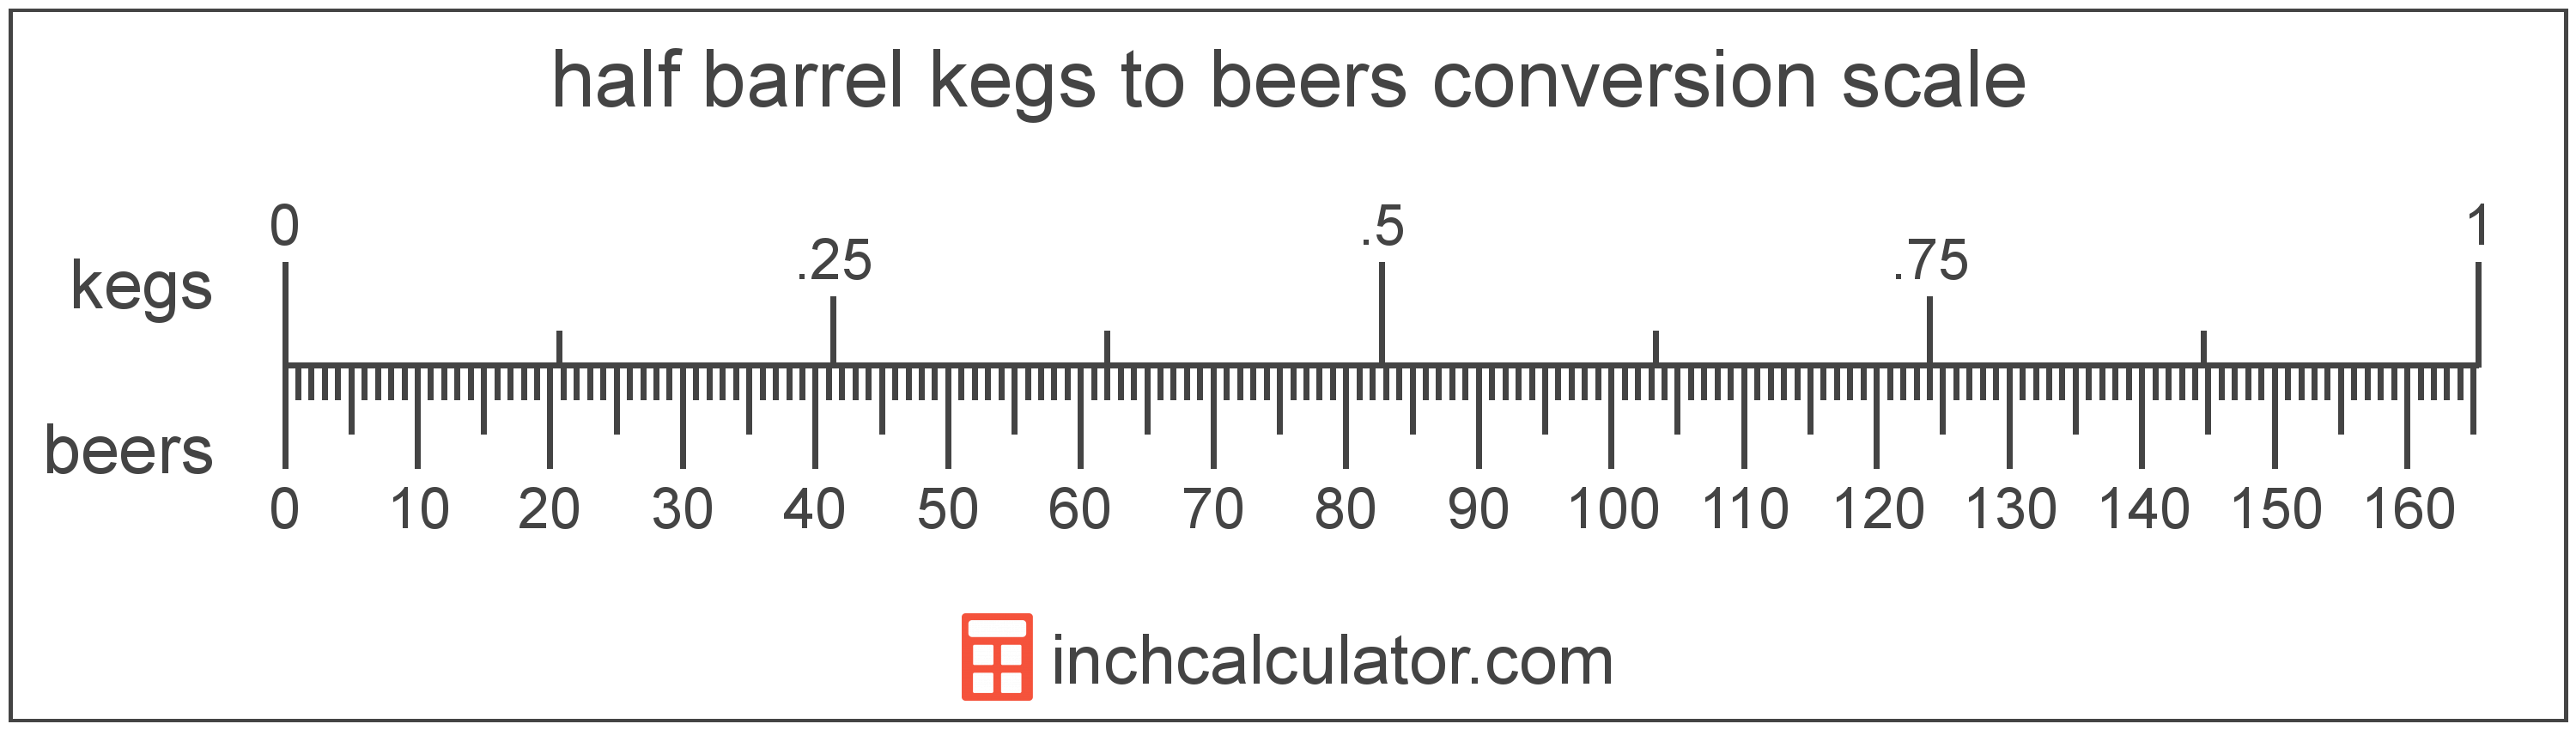 conversion scale showing beers and equivalent half barrel kegs beer volume values